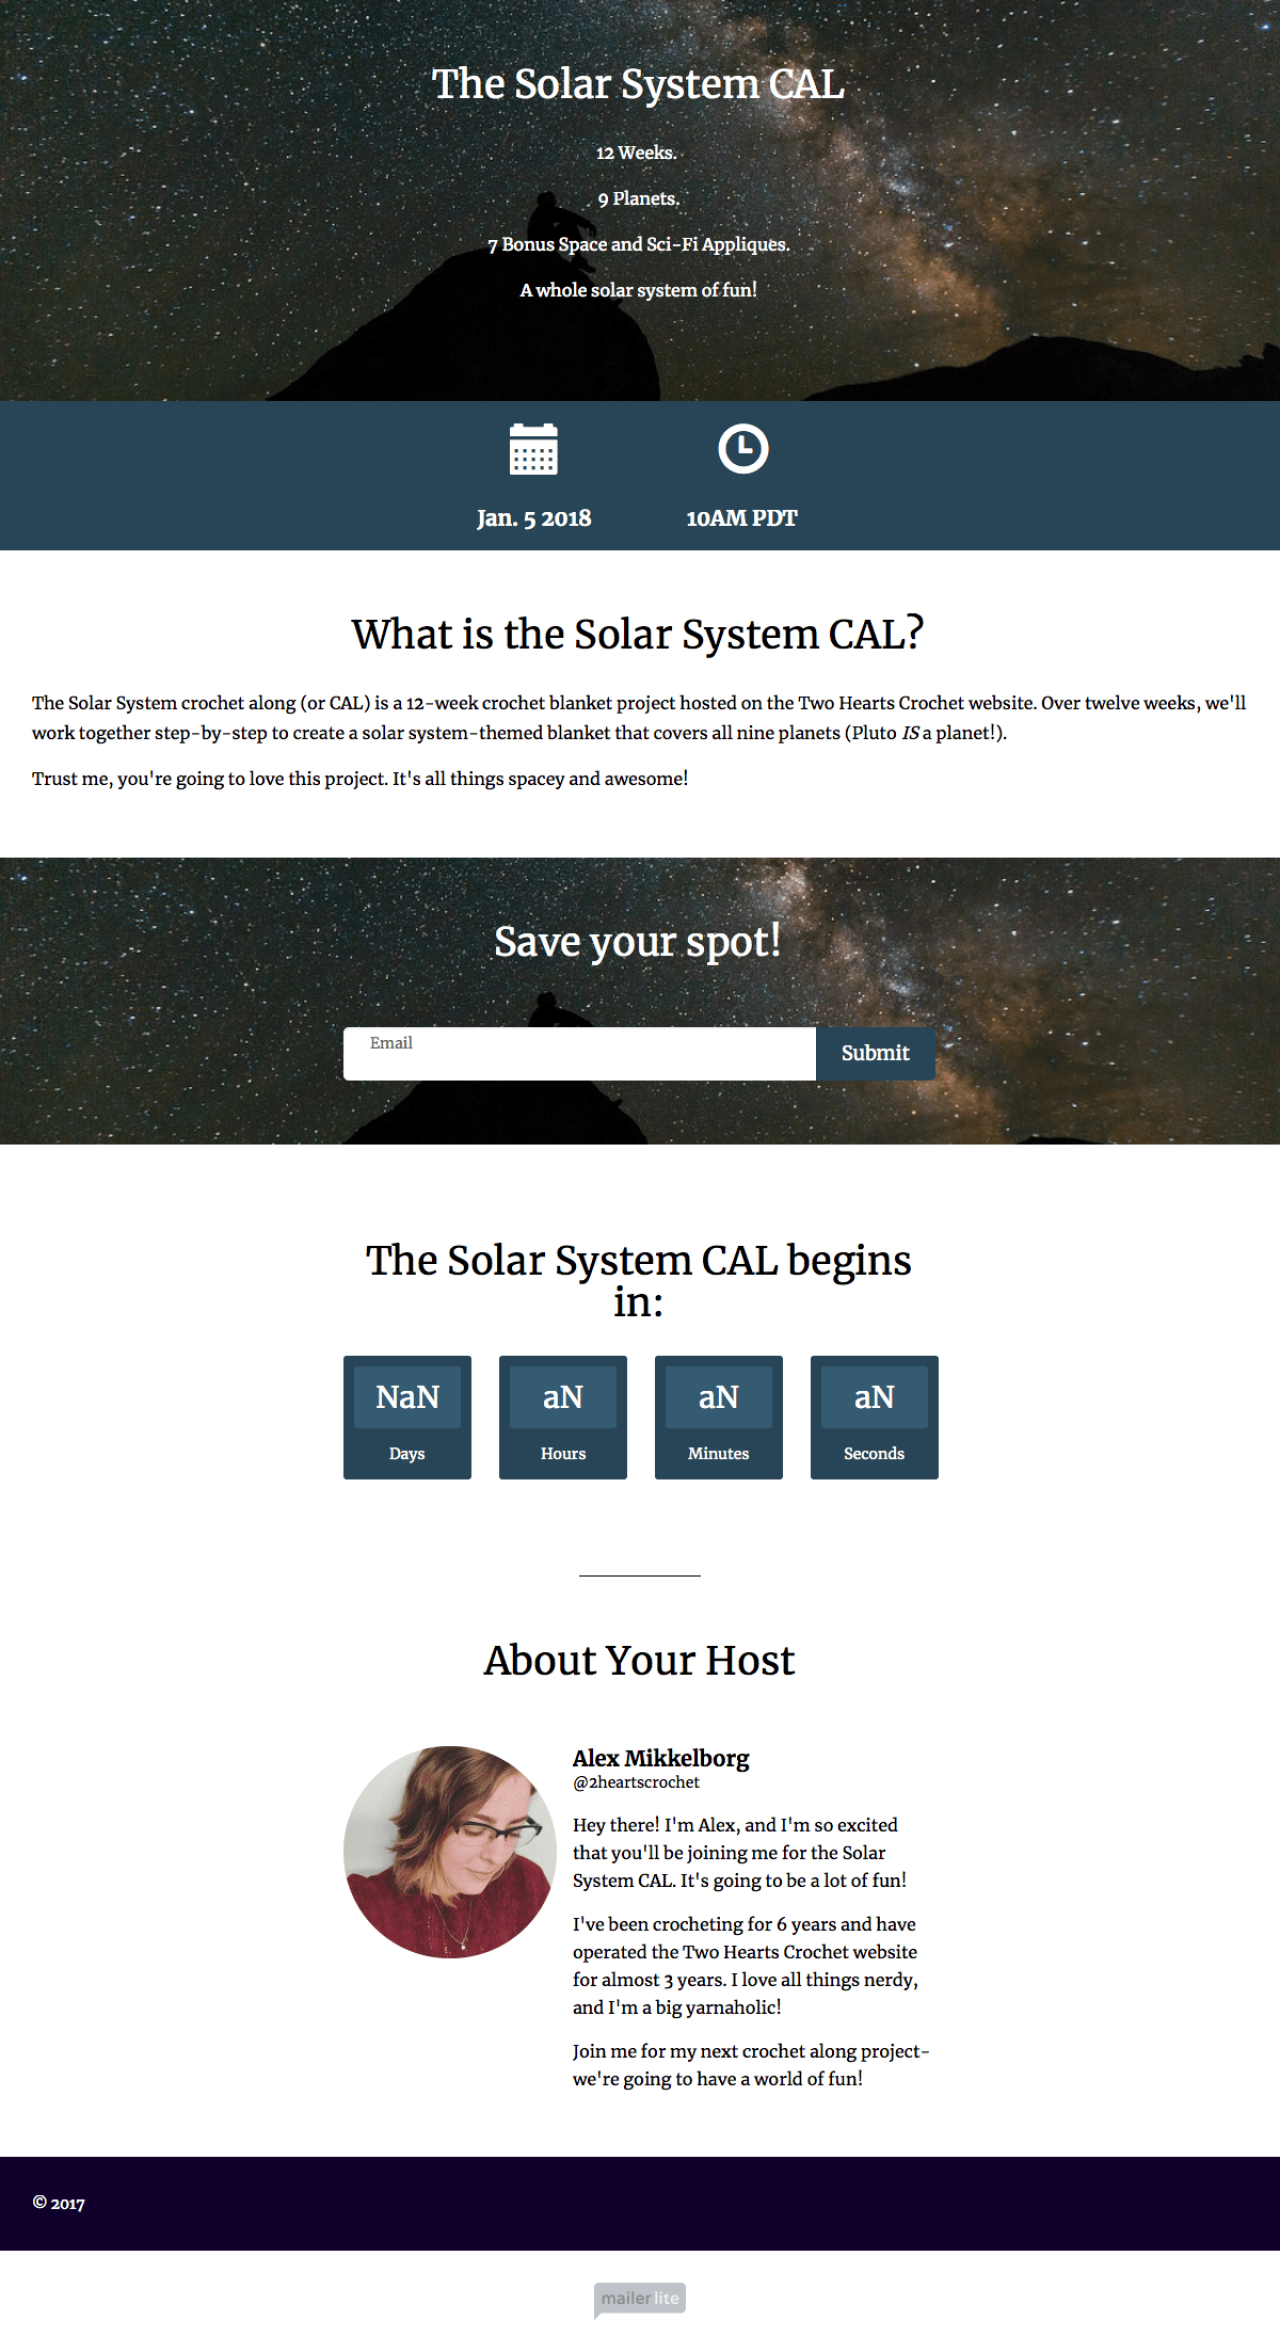 Solar System CAL example - Made with MailerLite